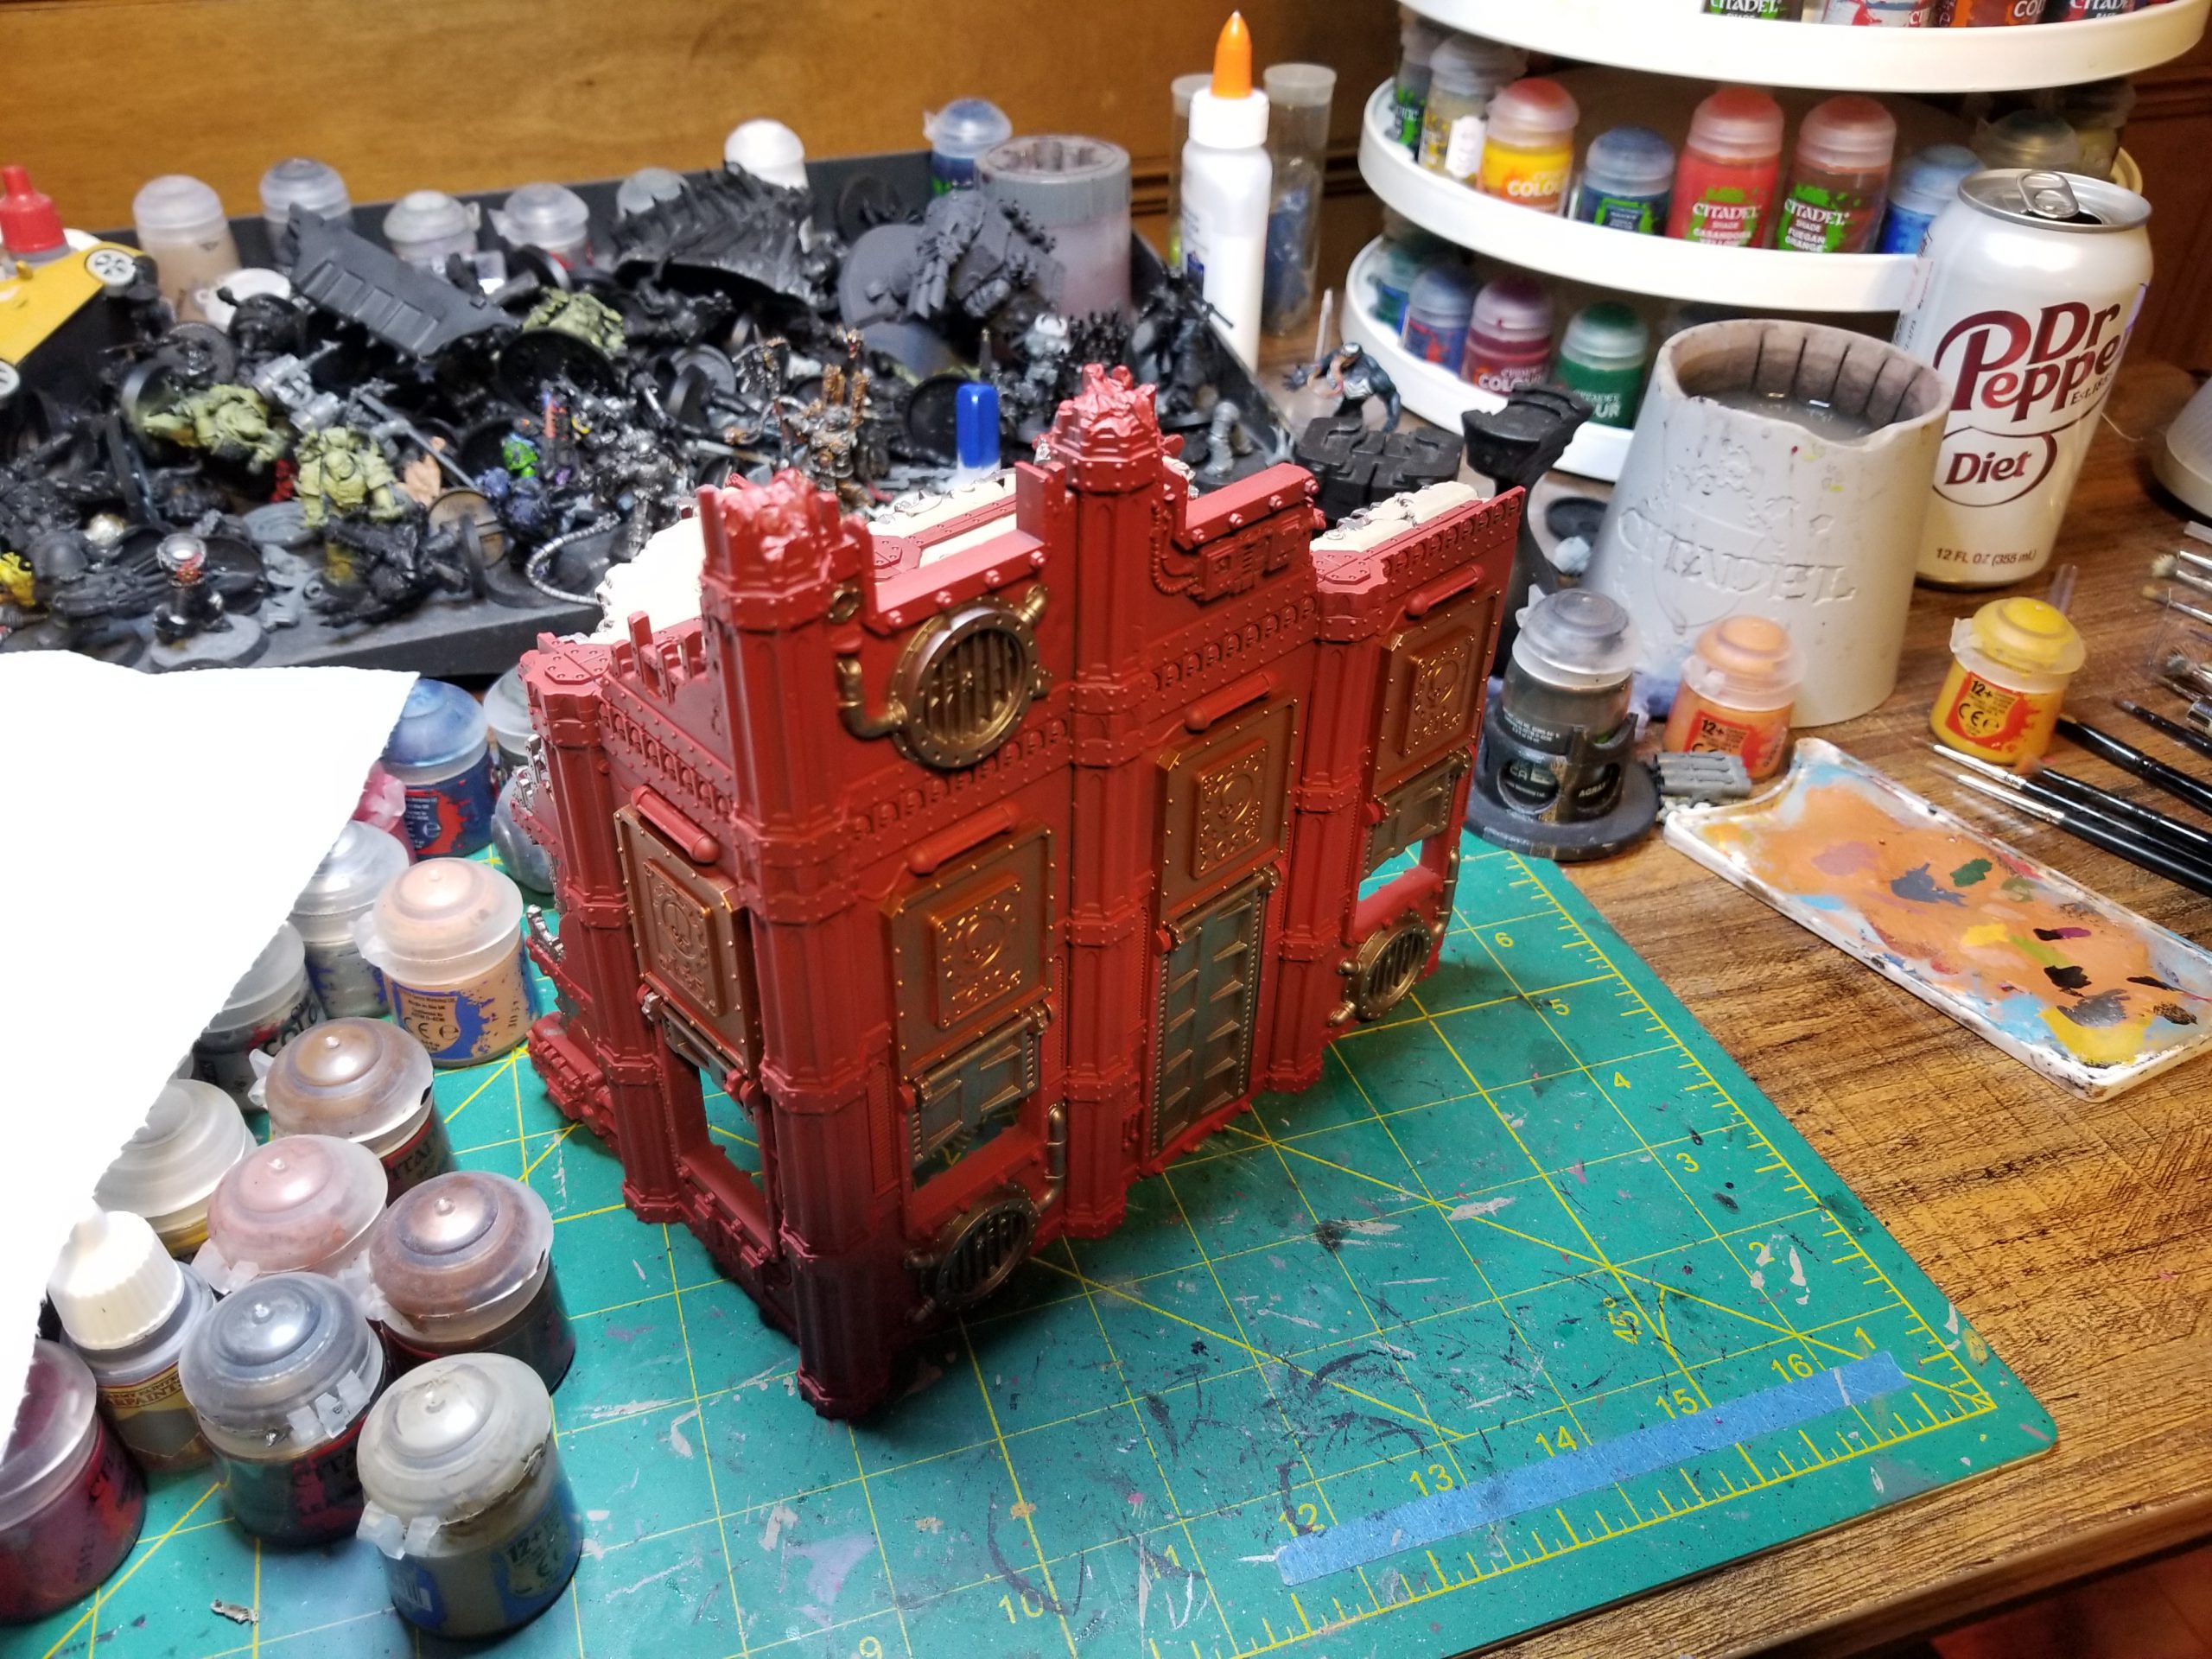 Sentry Box - Our Citadel paint racks are a little bare